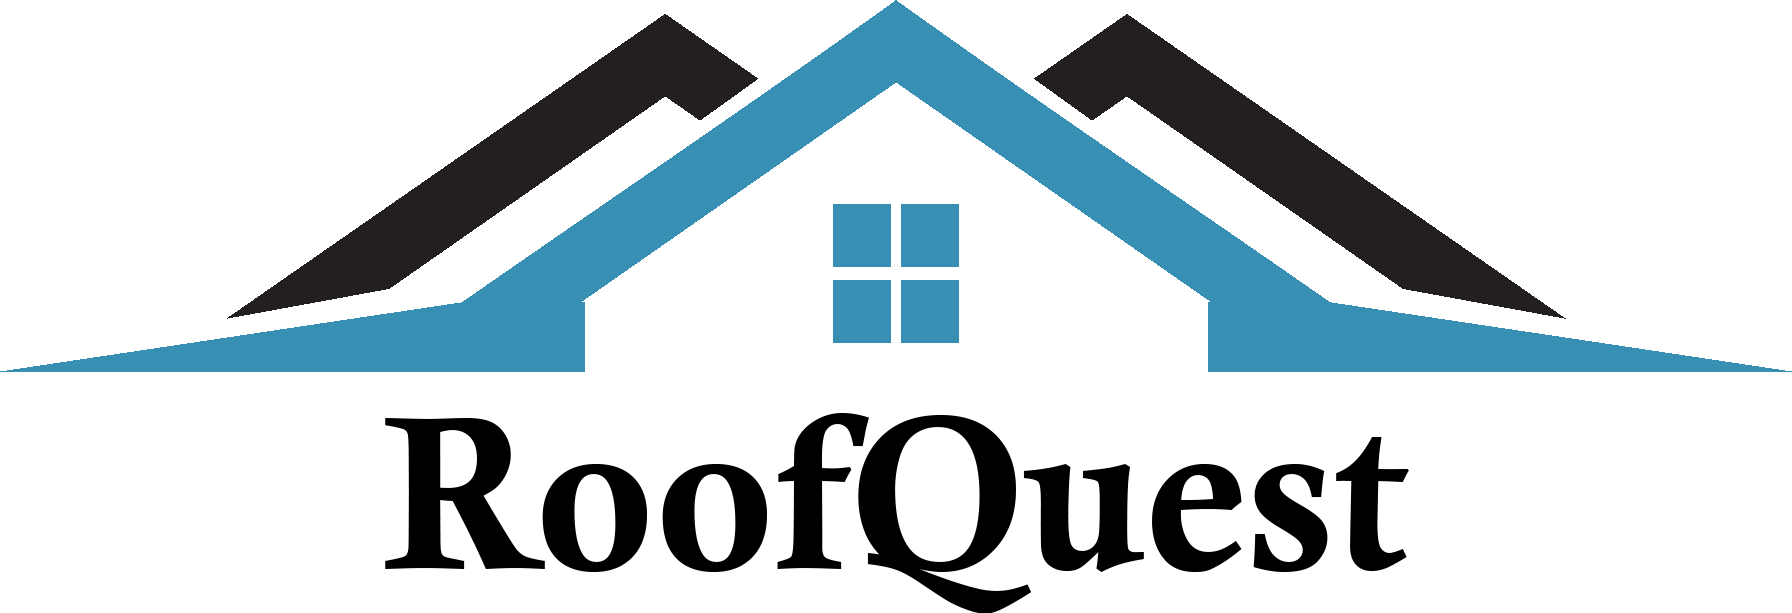 Roofquest: Roofers in Manchester Logo